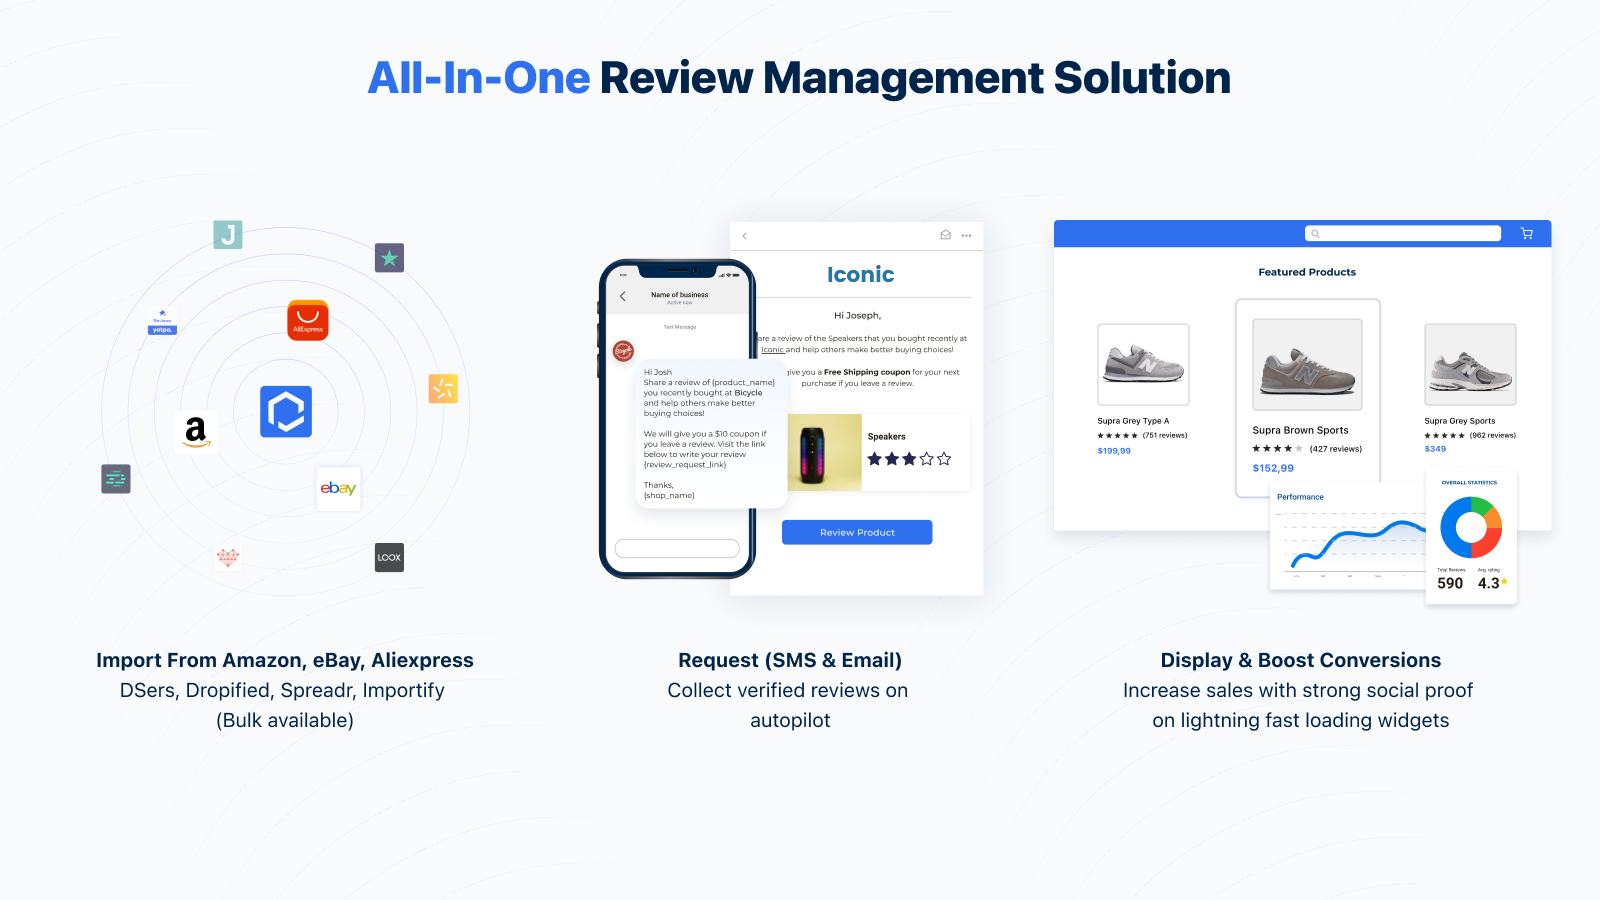 Add reviews to Shopify - Use a Shopify review app